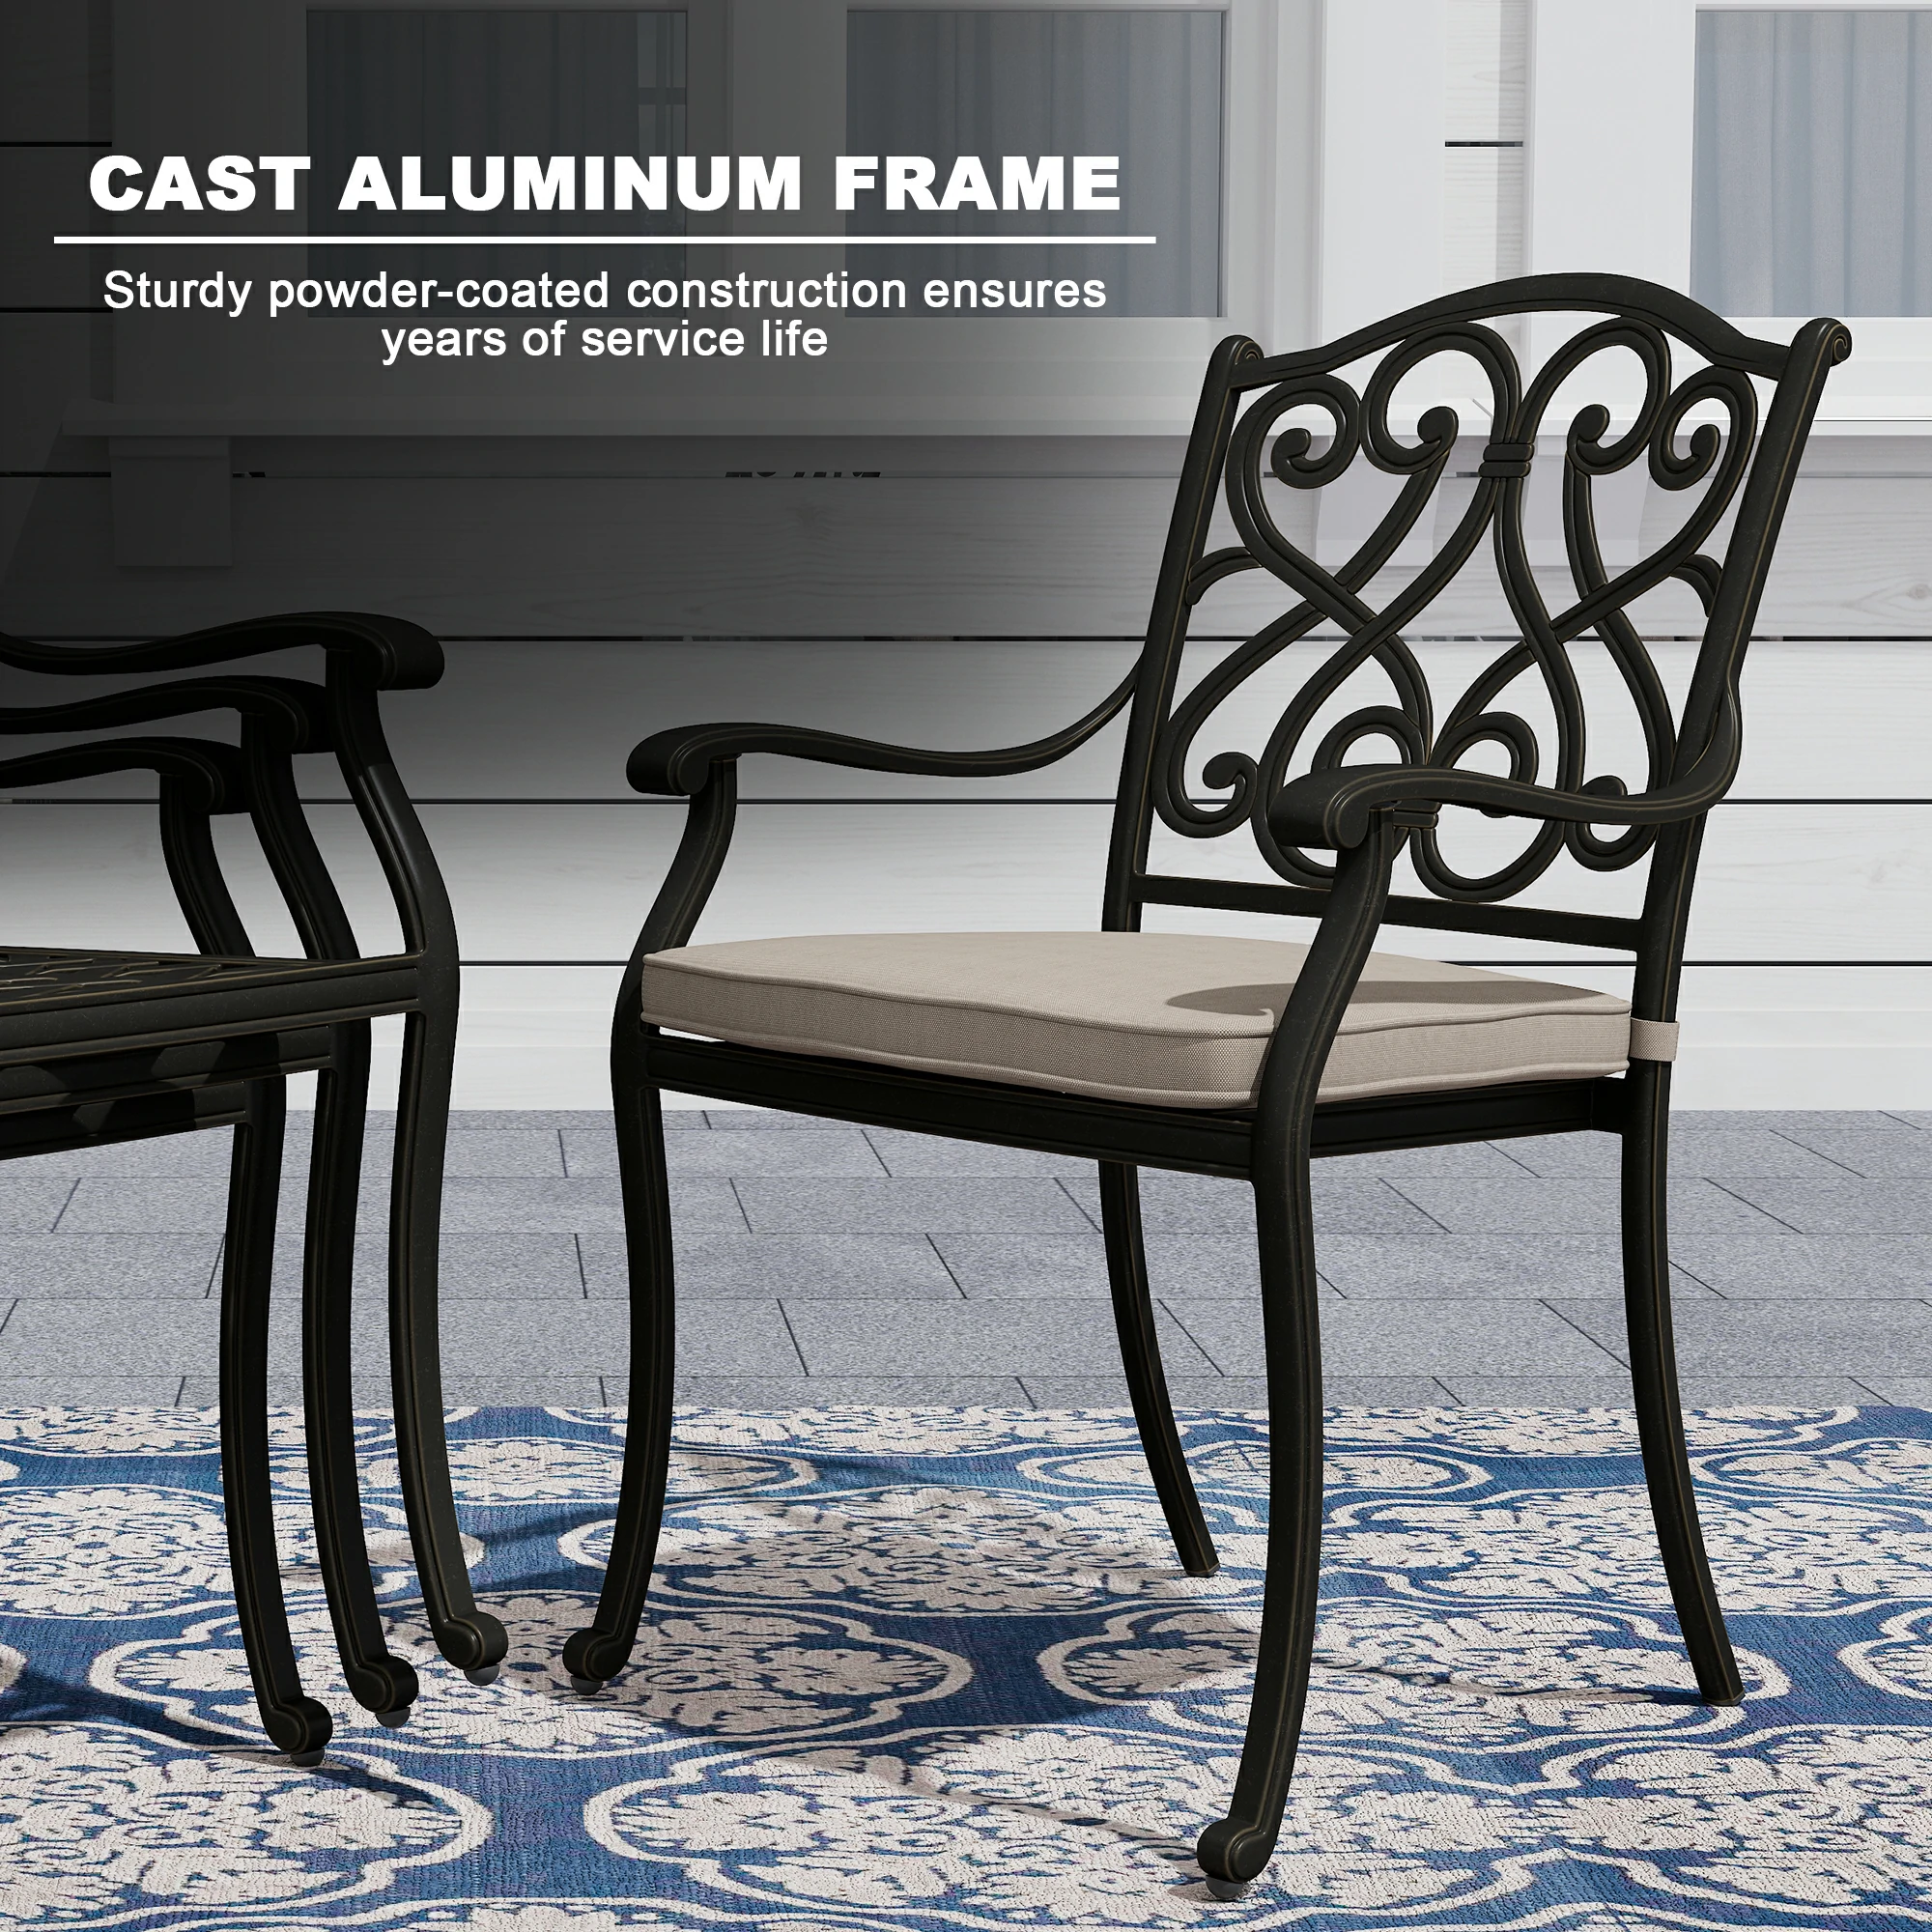 Cast Aluminum Chair Outdoor Dining Armchair with Cushion (Set of 4)